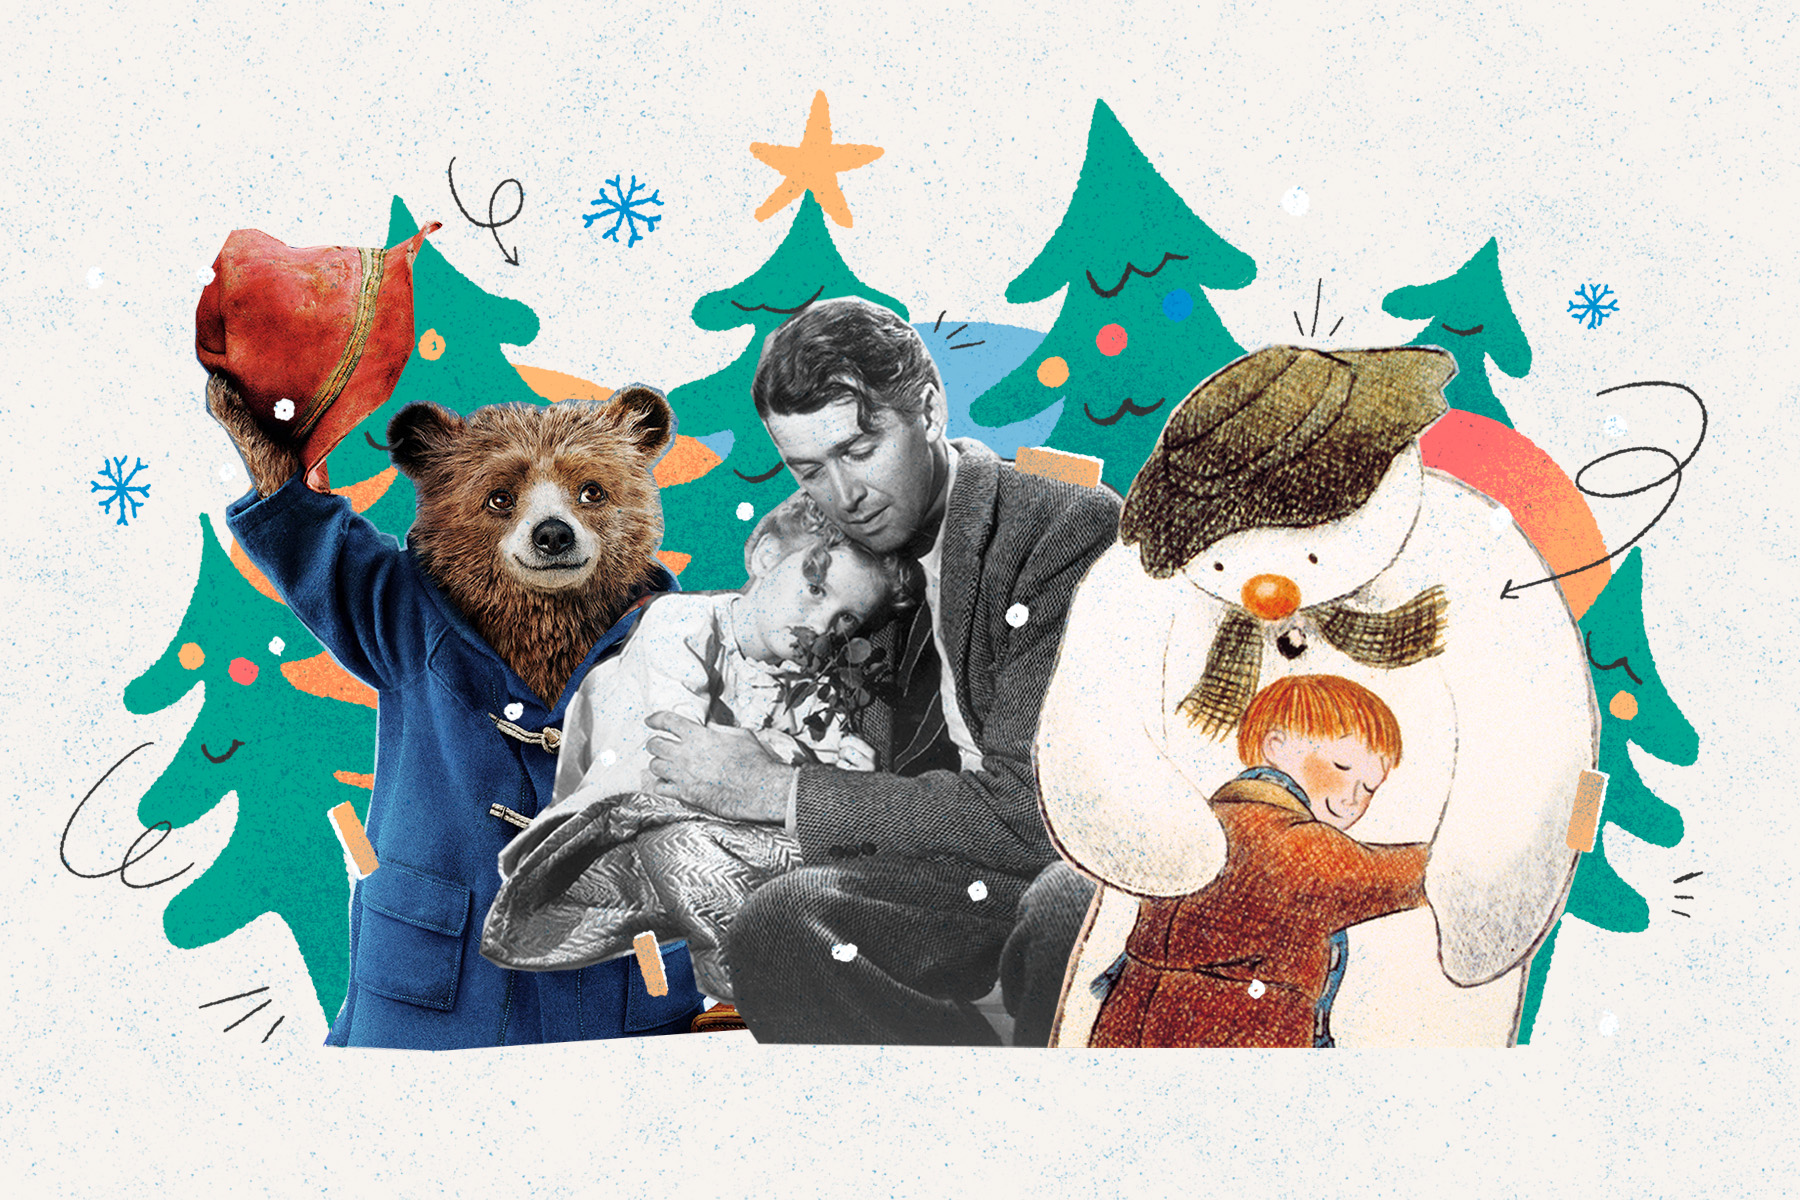 A collage of Paddington Bear raising his hat, James Stewart in It's a Wonderful Life and The Snowman seen against a background of colourful Christmas tree illustrations.